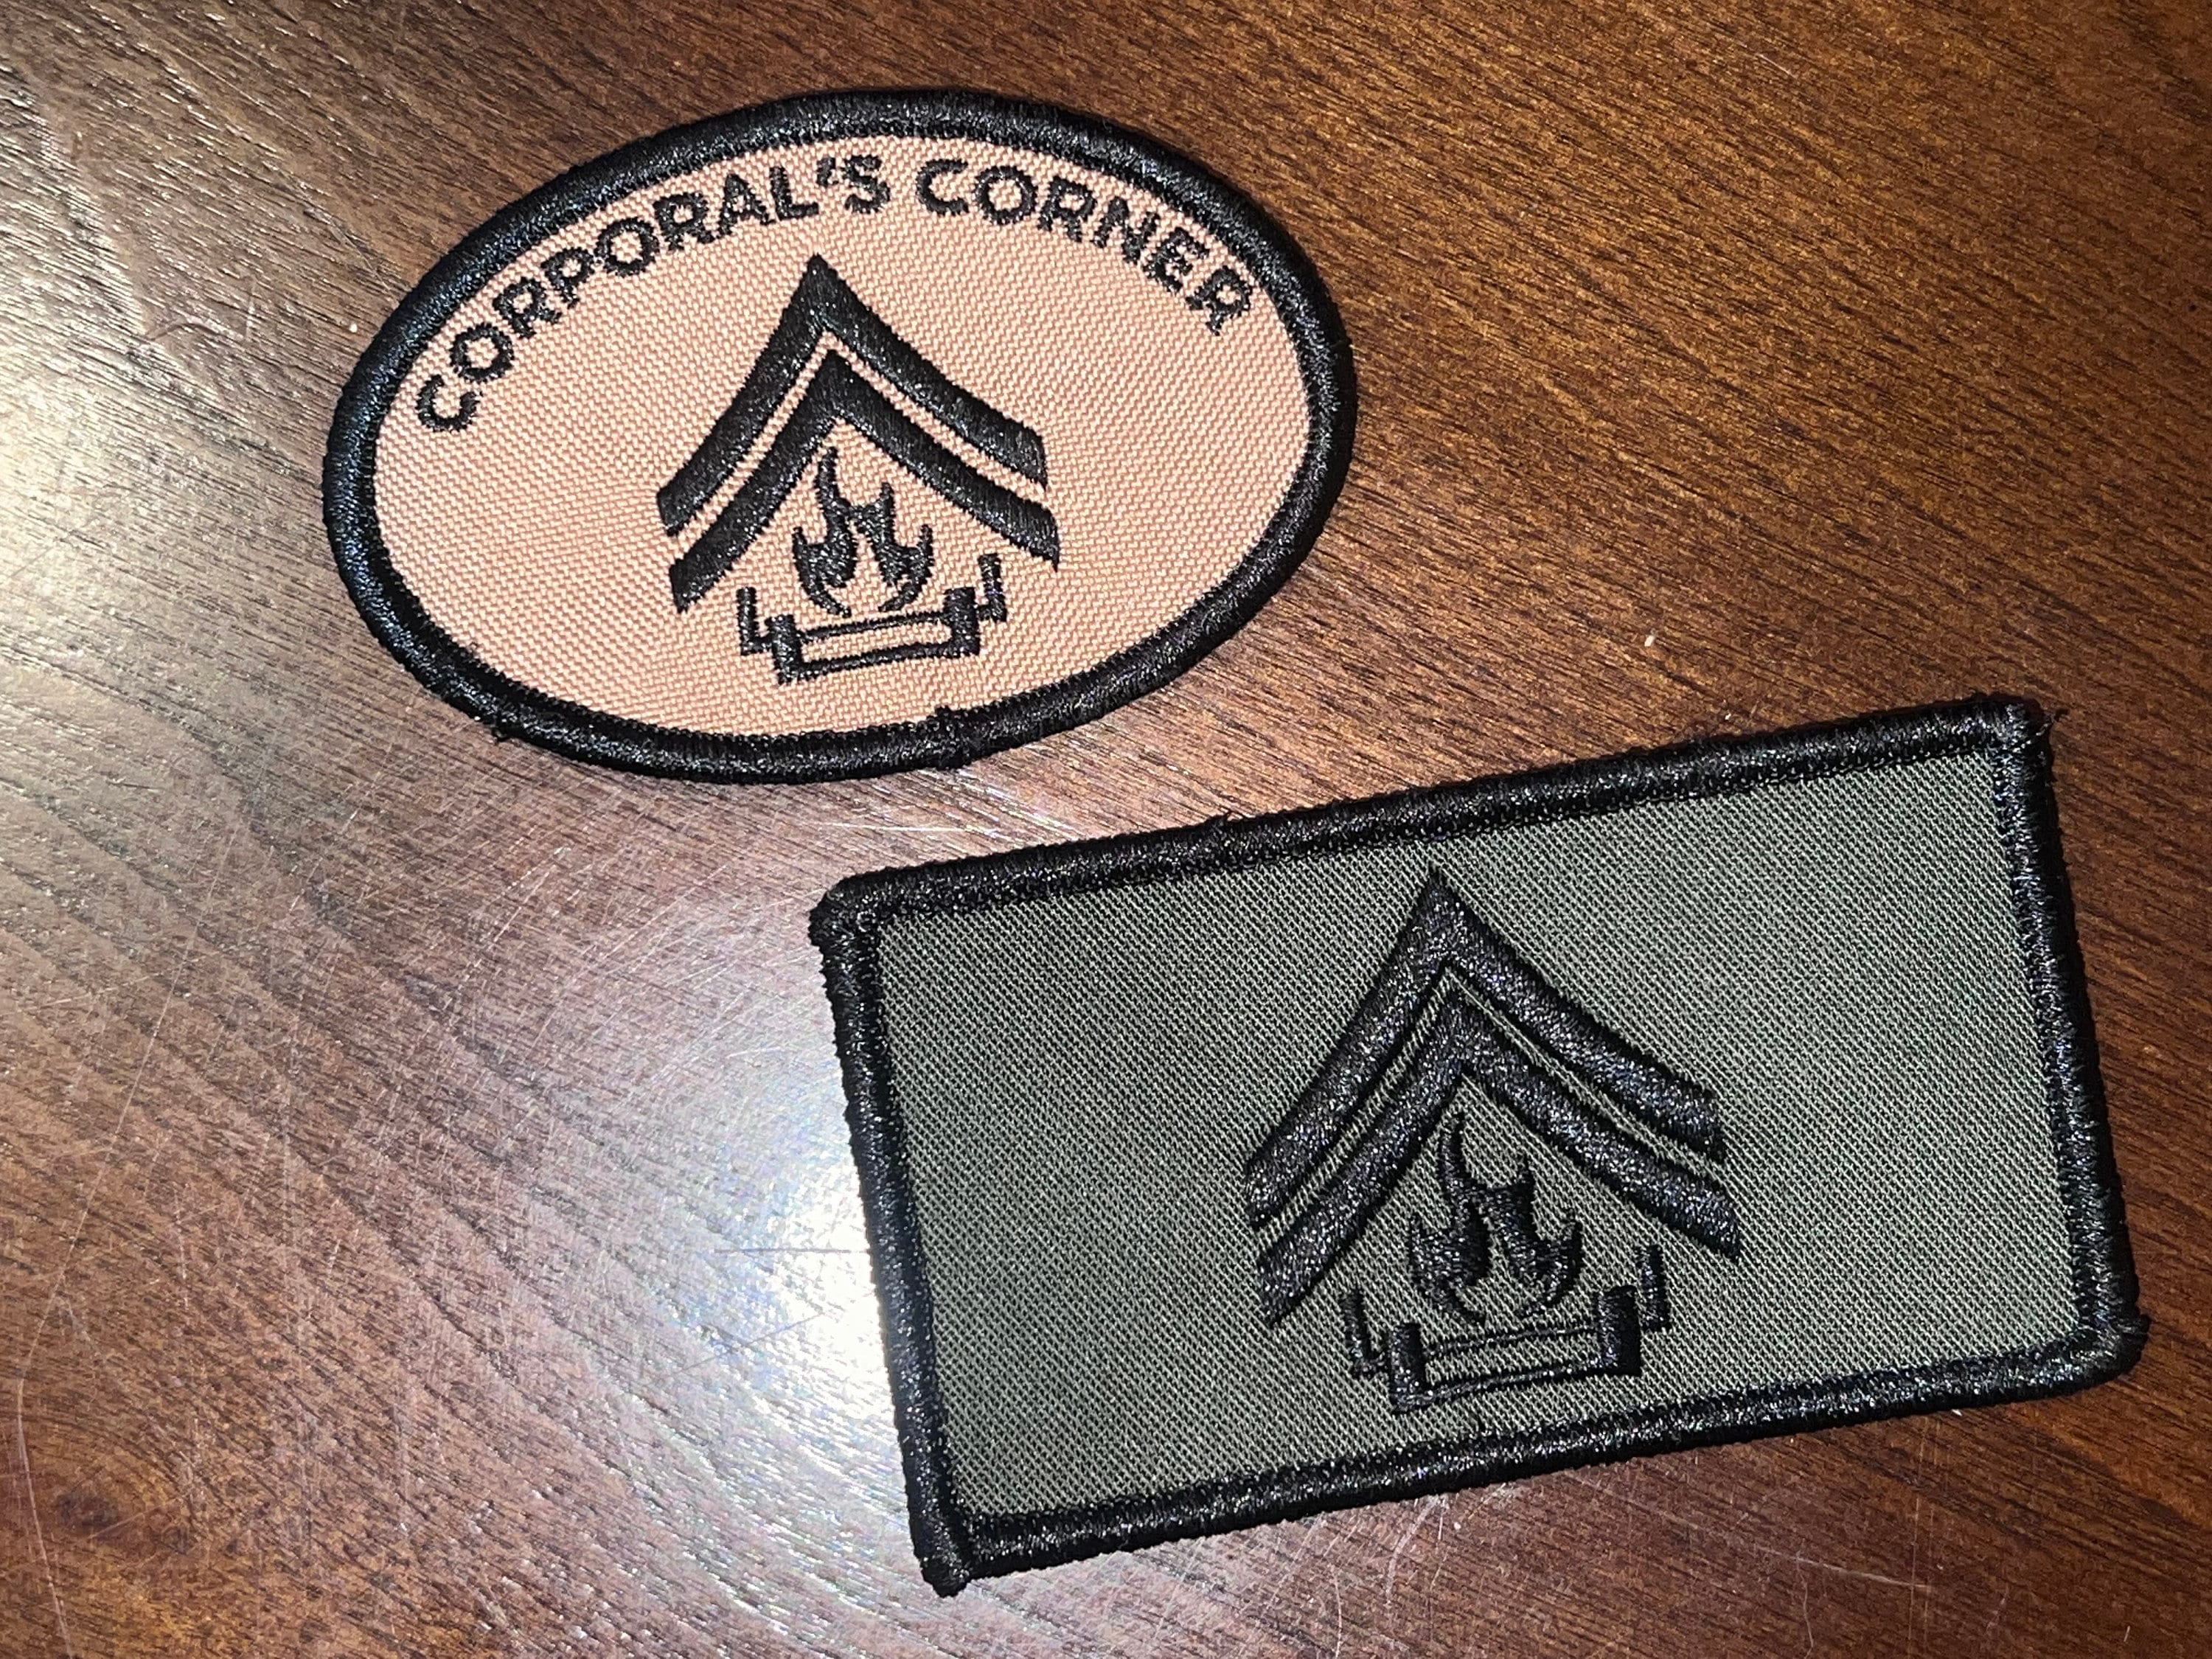 Corporals Corner 2 Patch Combo Pack (Combine Shipping and Save Money)